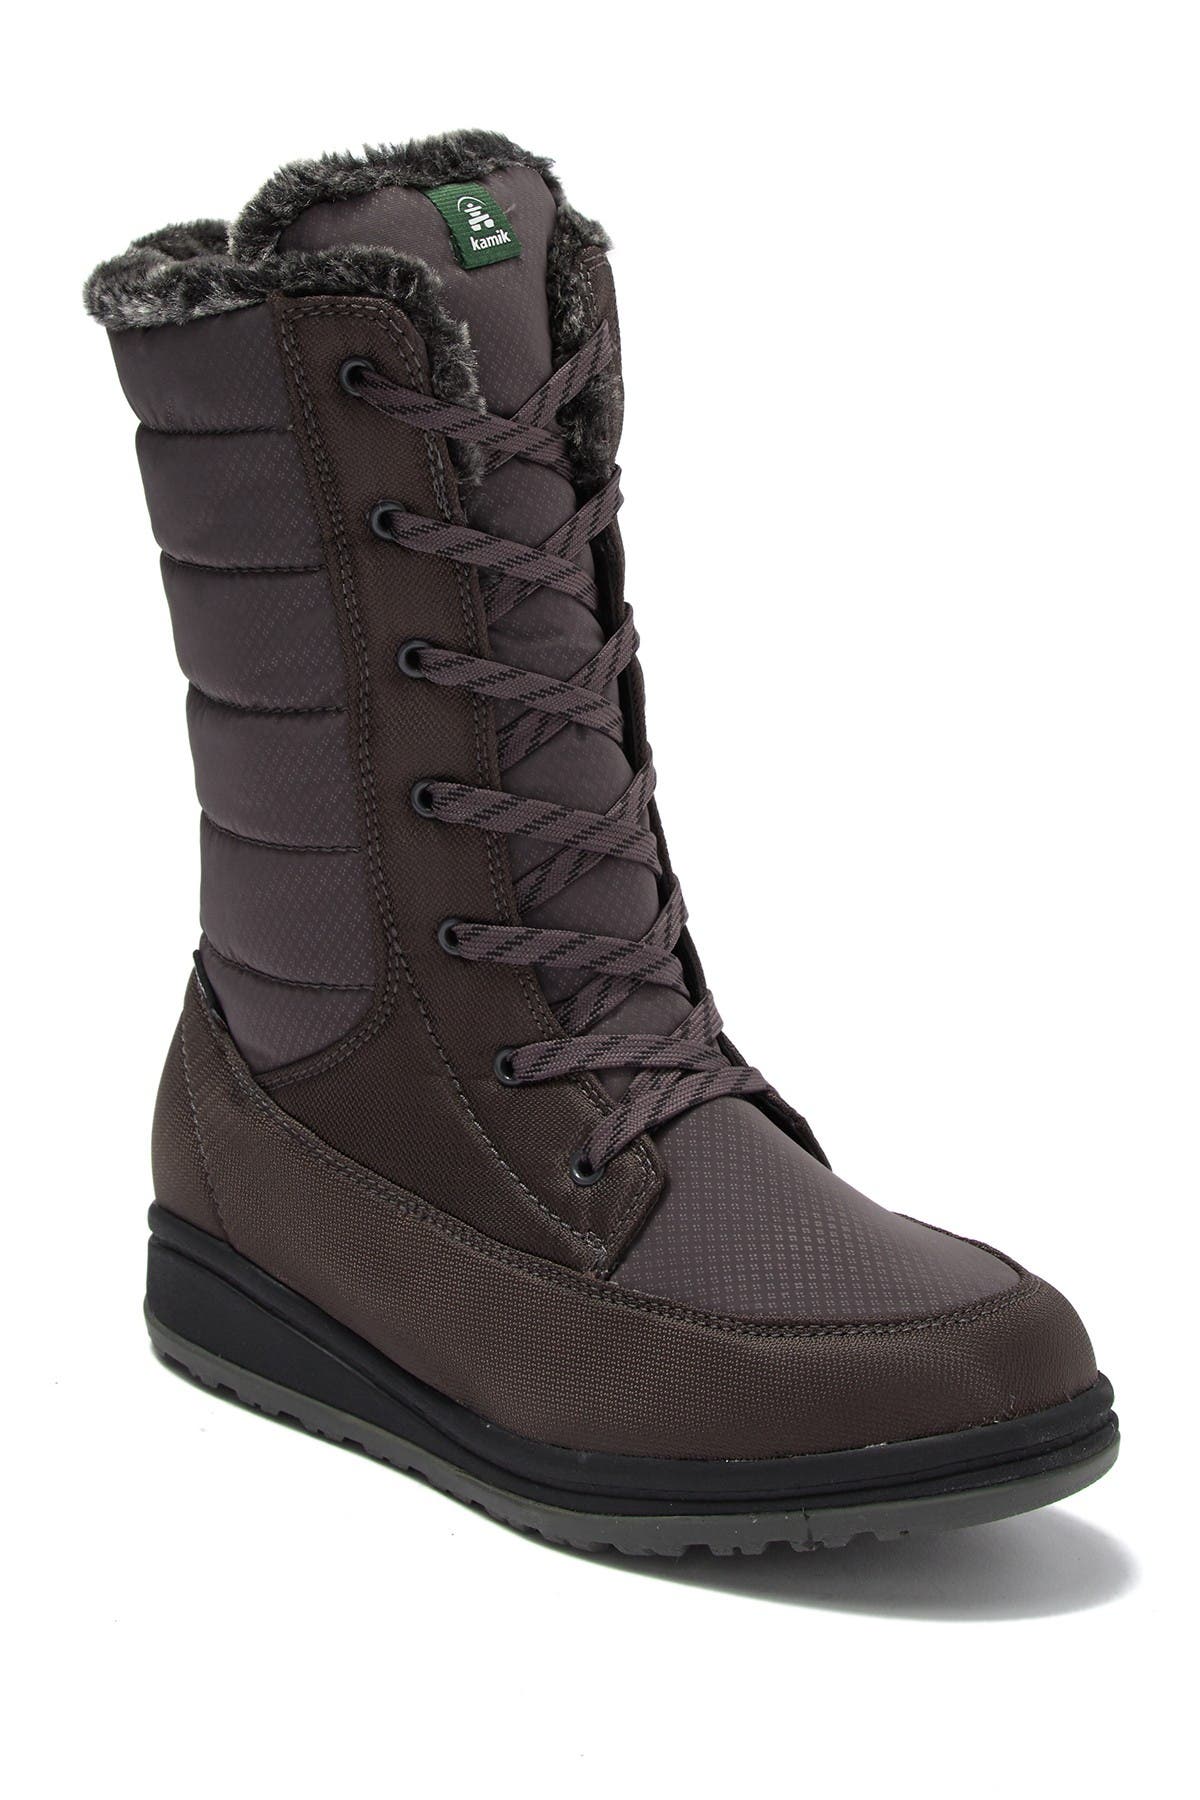 snow boots on sale free shipping